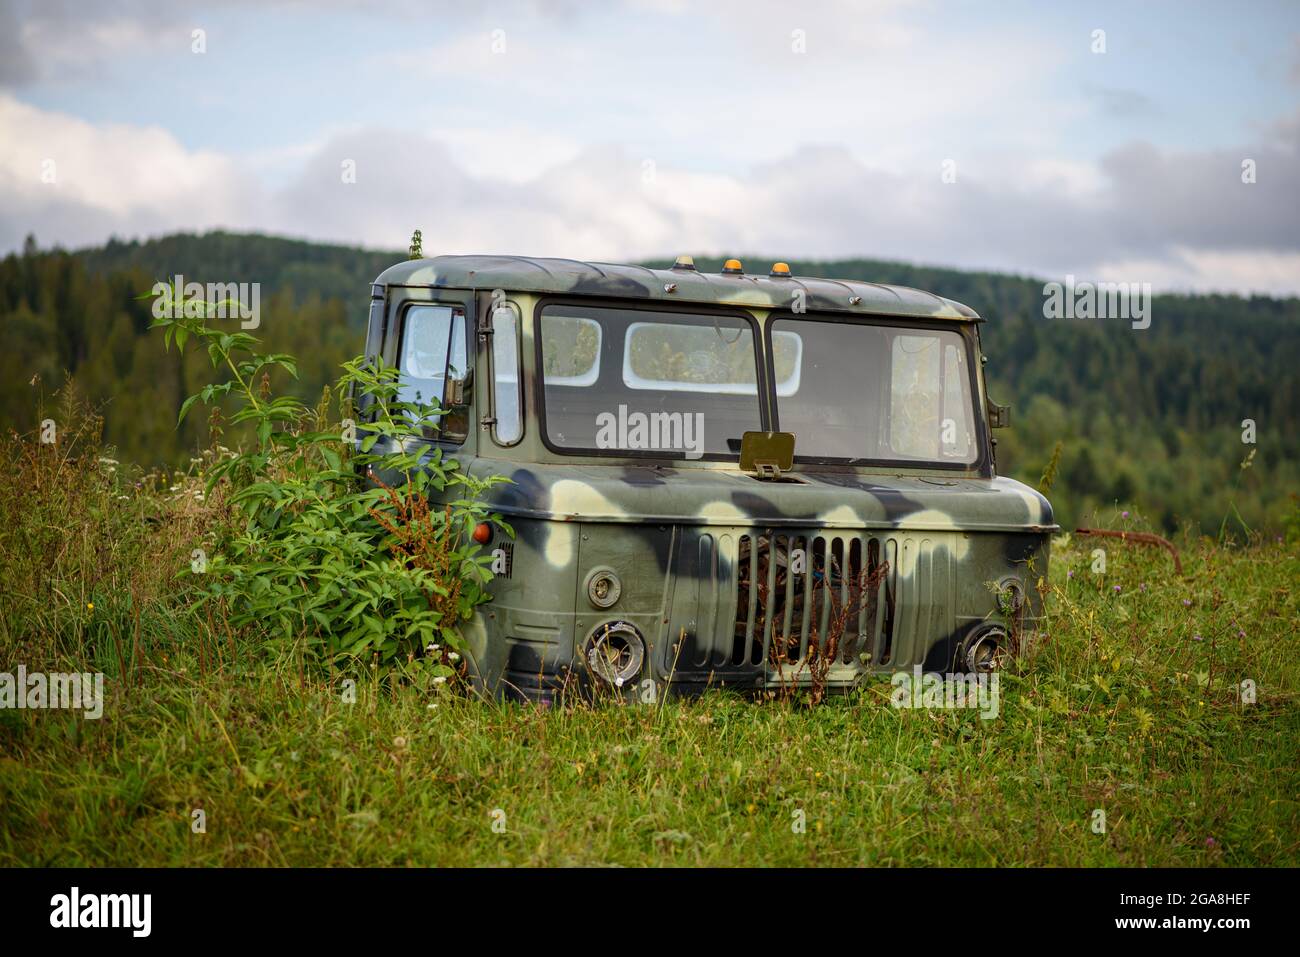 Abandoned vehicle among nature. Summer sunny day in mountains. Stock Photo